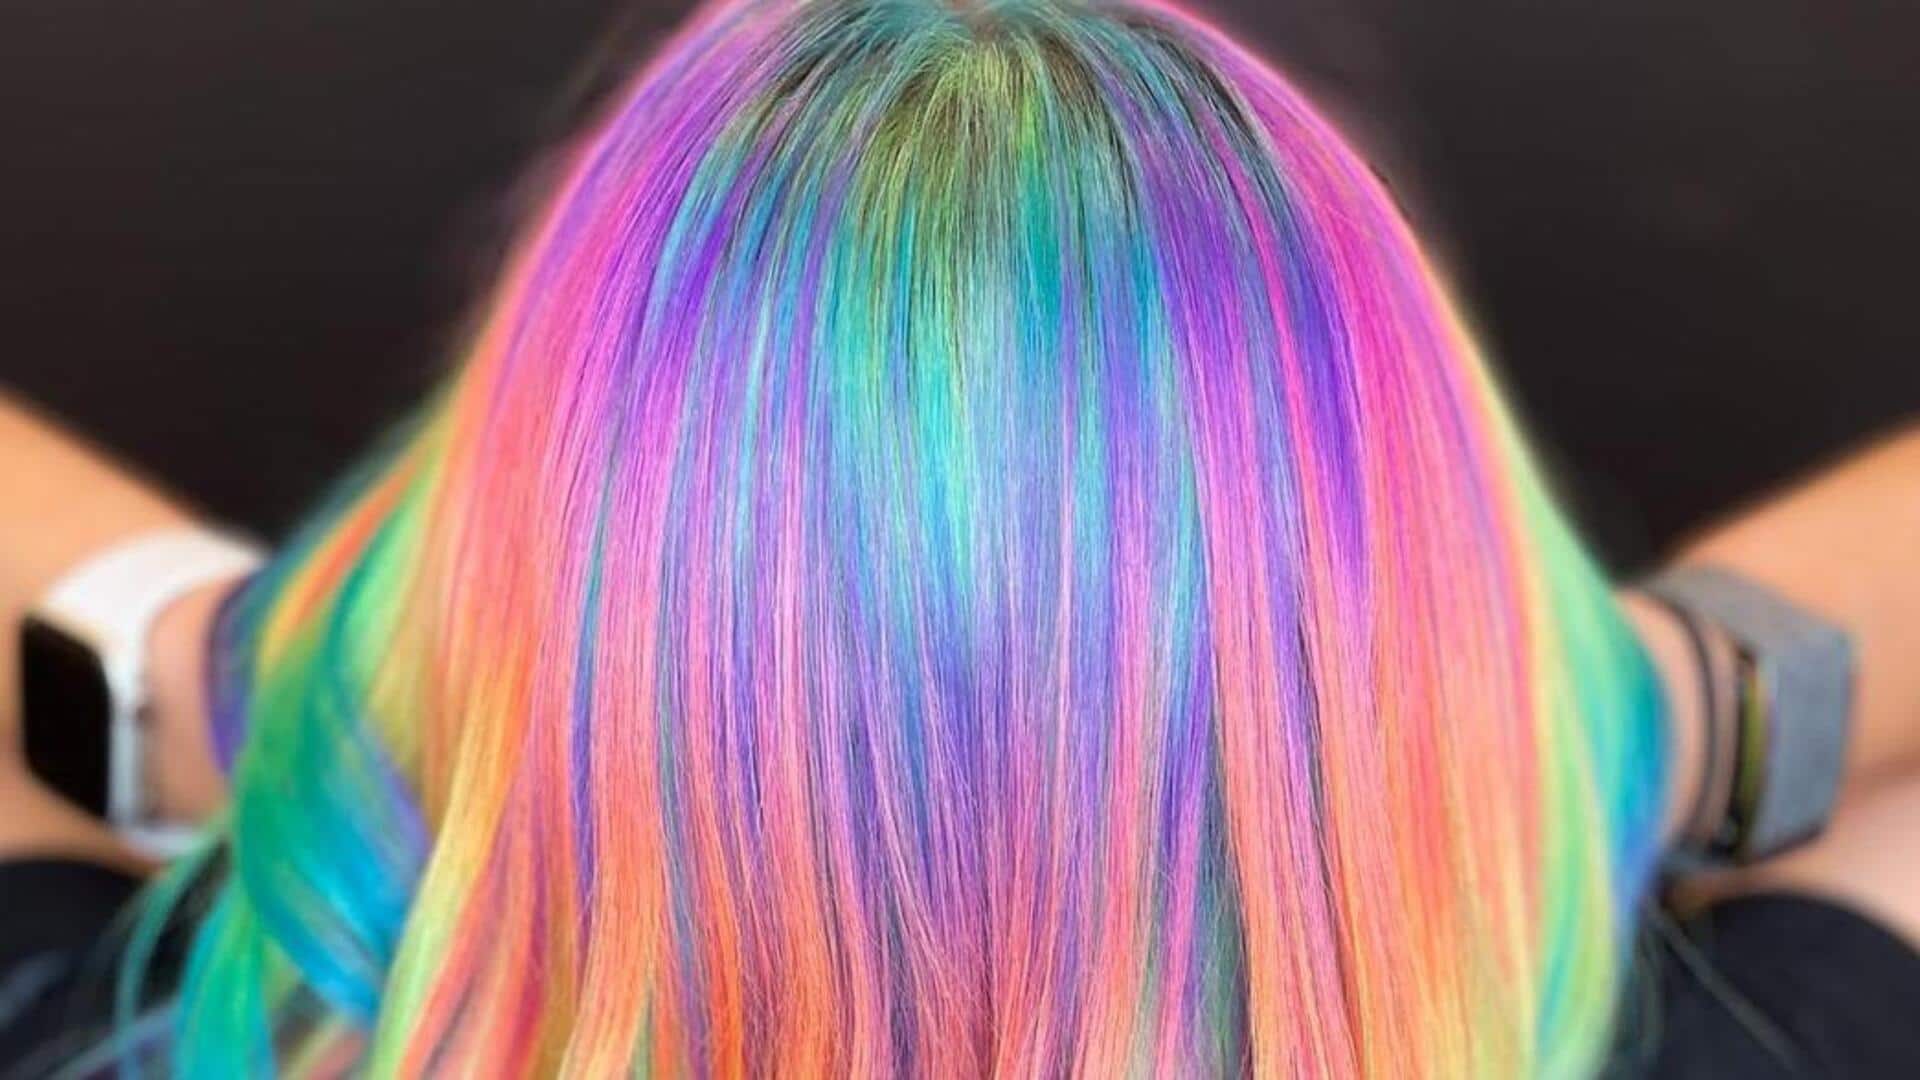 Prism hair: Art and beauty in a spectrum of colors